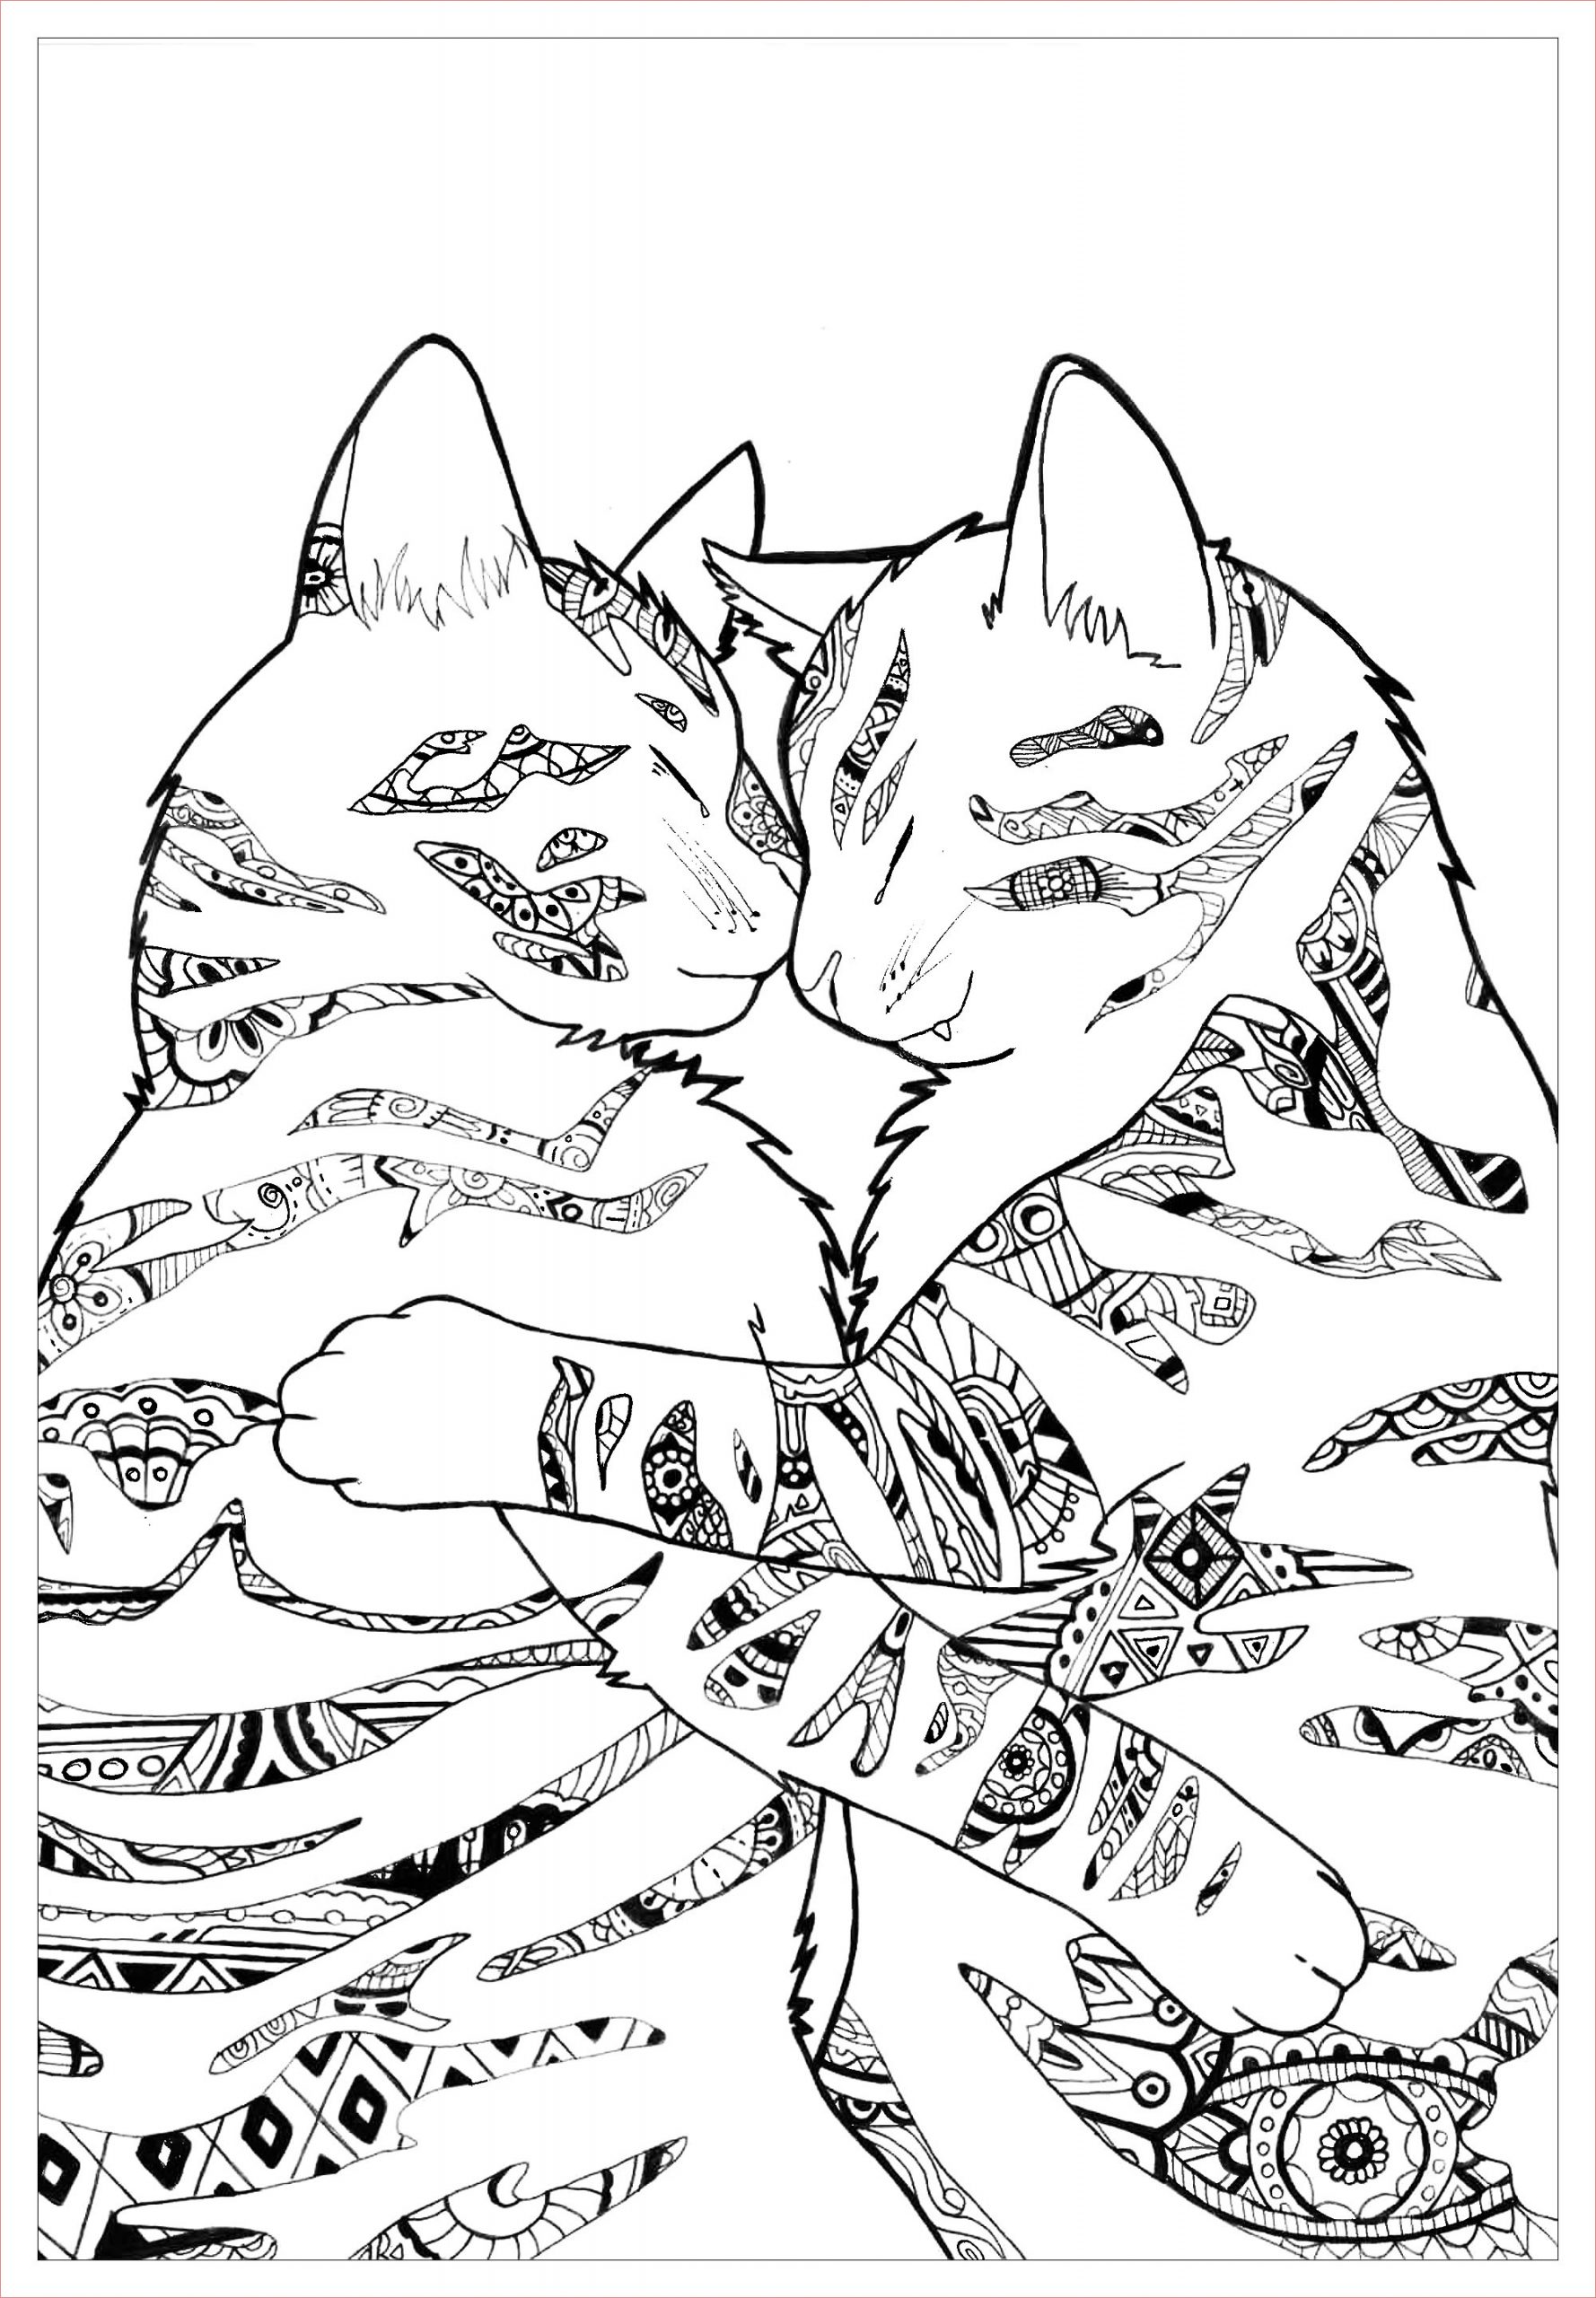 image=cats coloring page cats by paulined 1